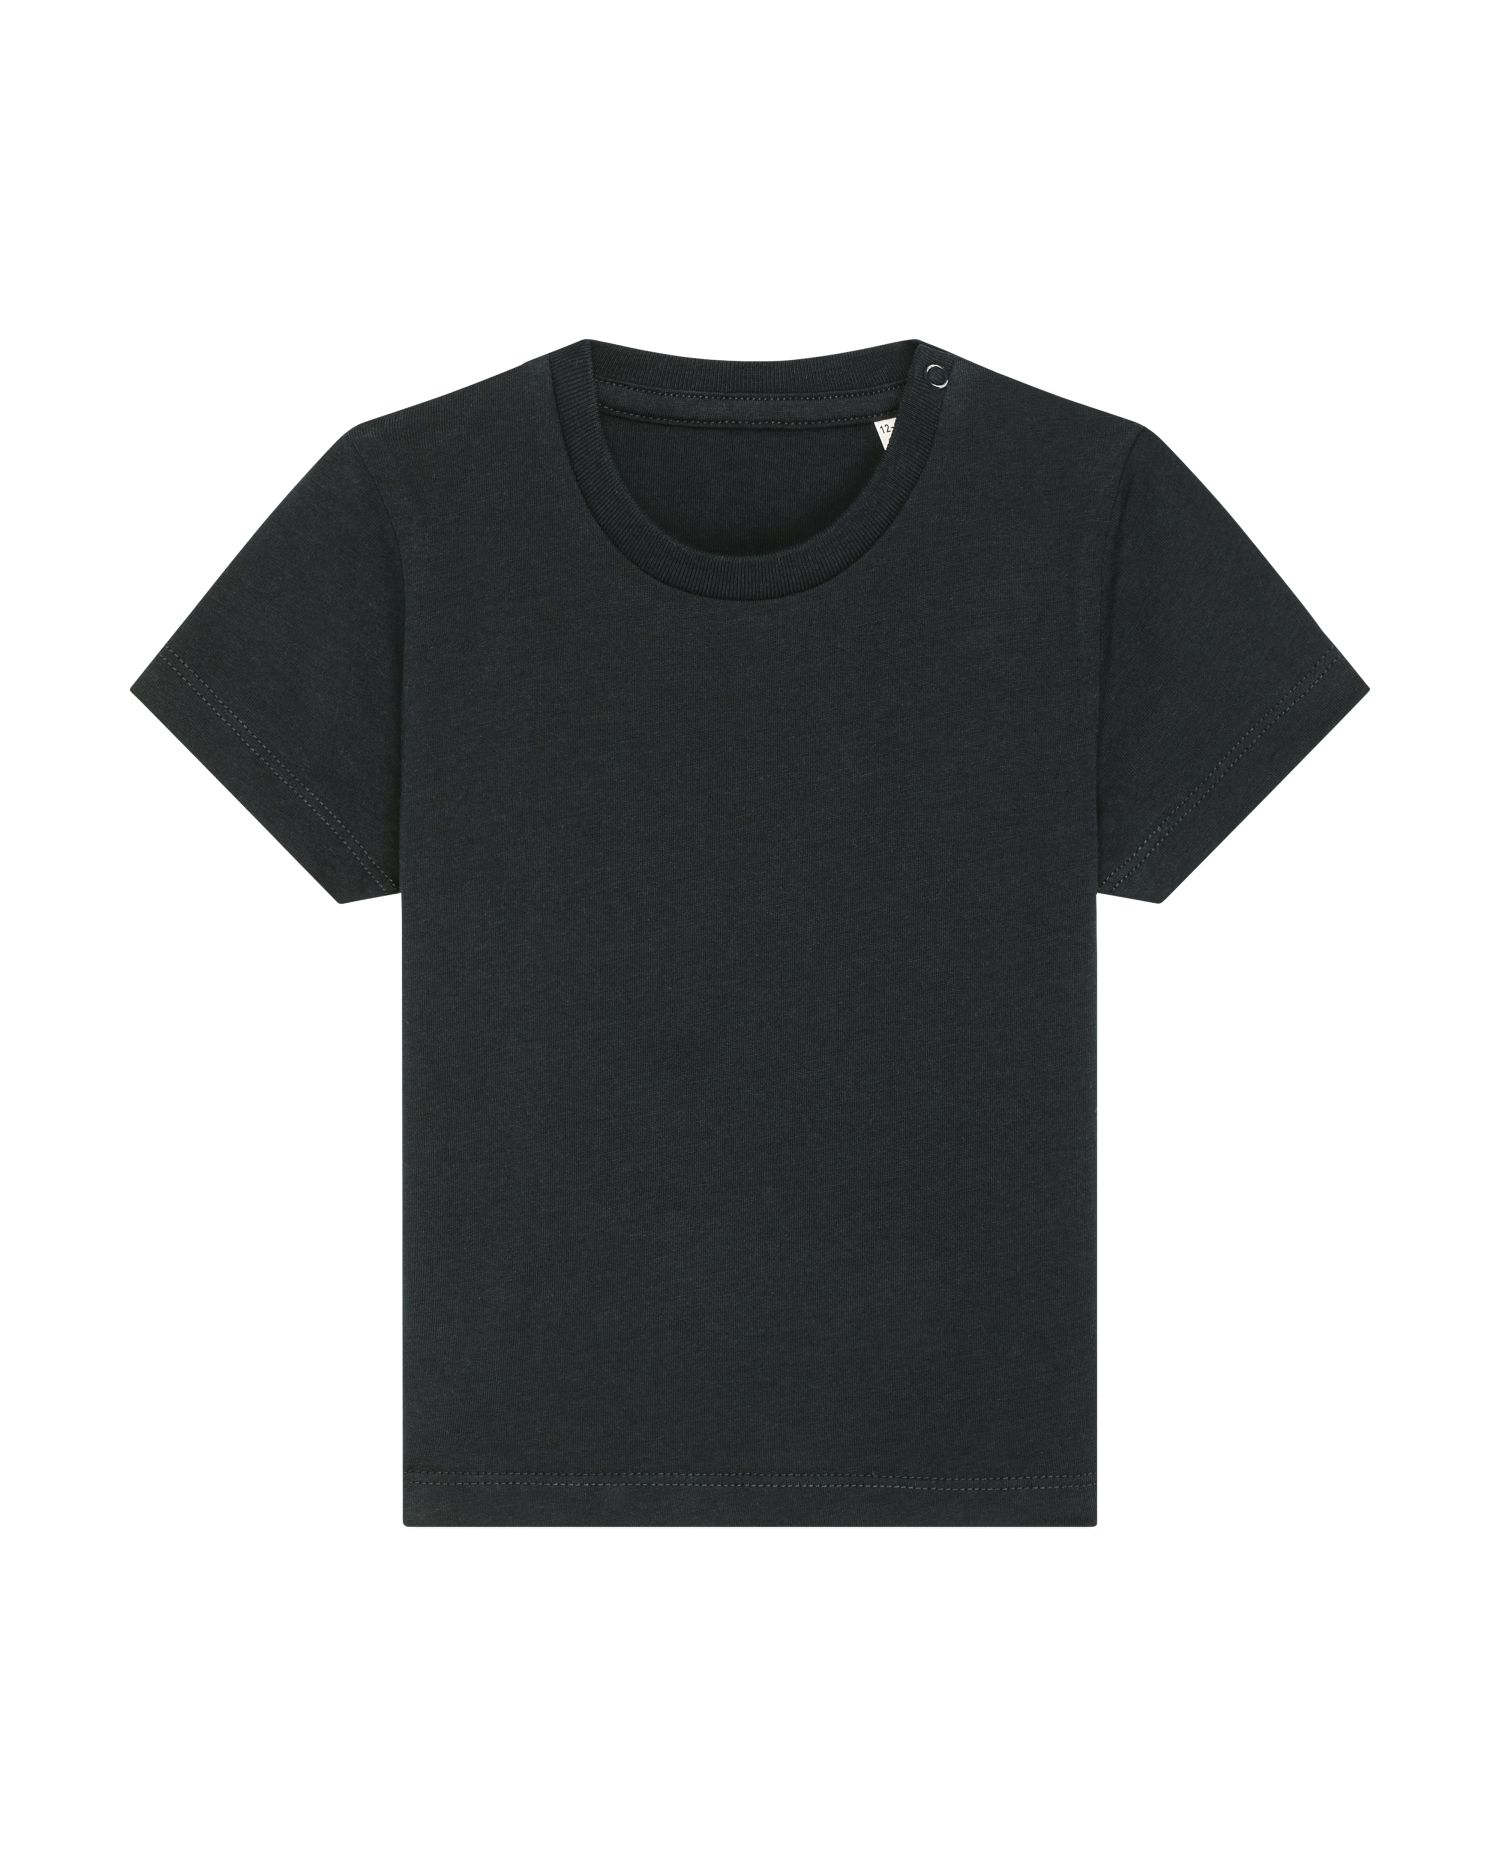 T-Shirt Baby Creator in Farbe Black